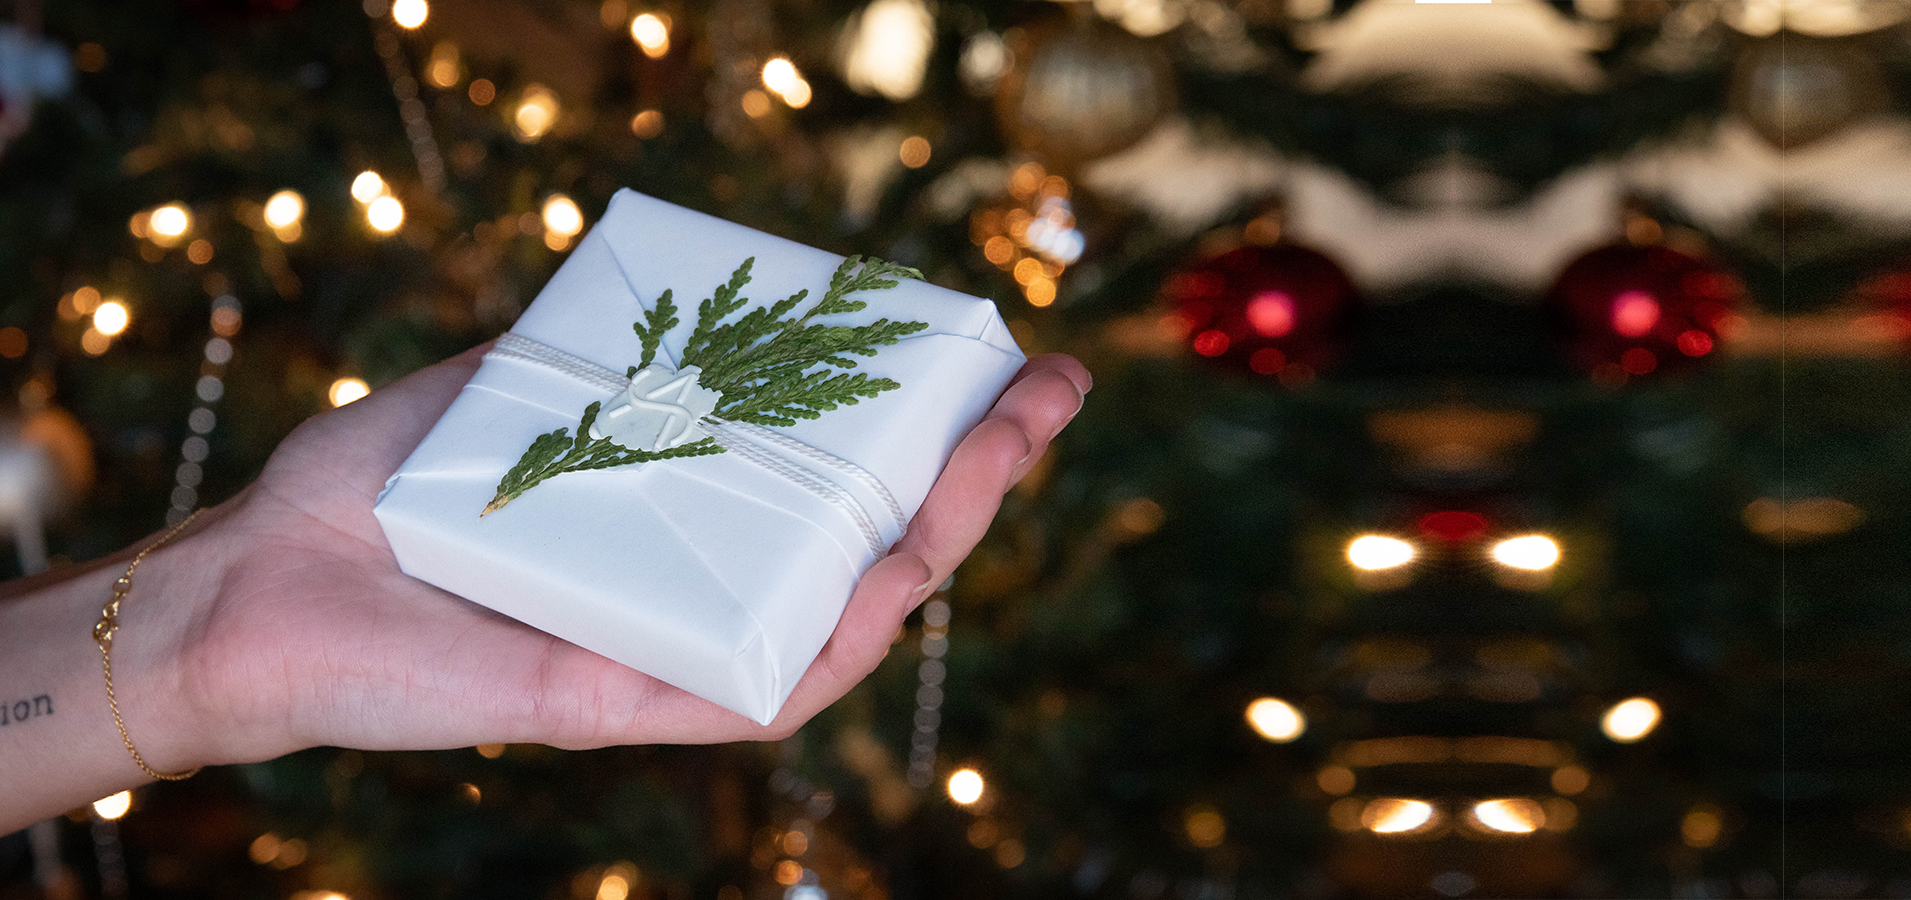 hand holding wrapped jewelry gift box in front of christmas tree